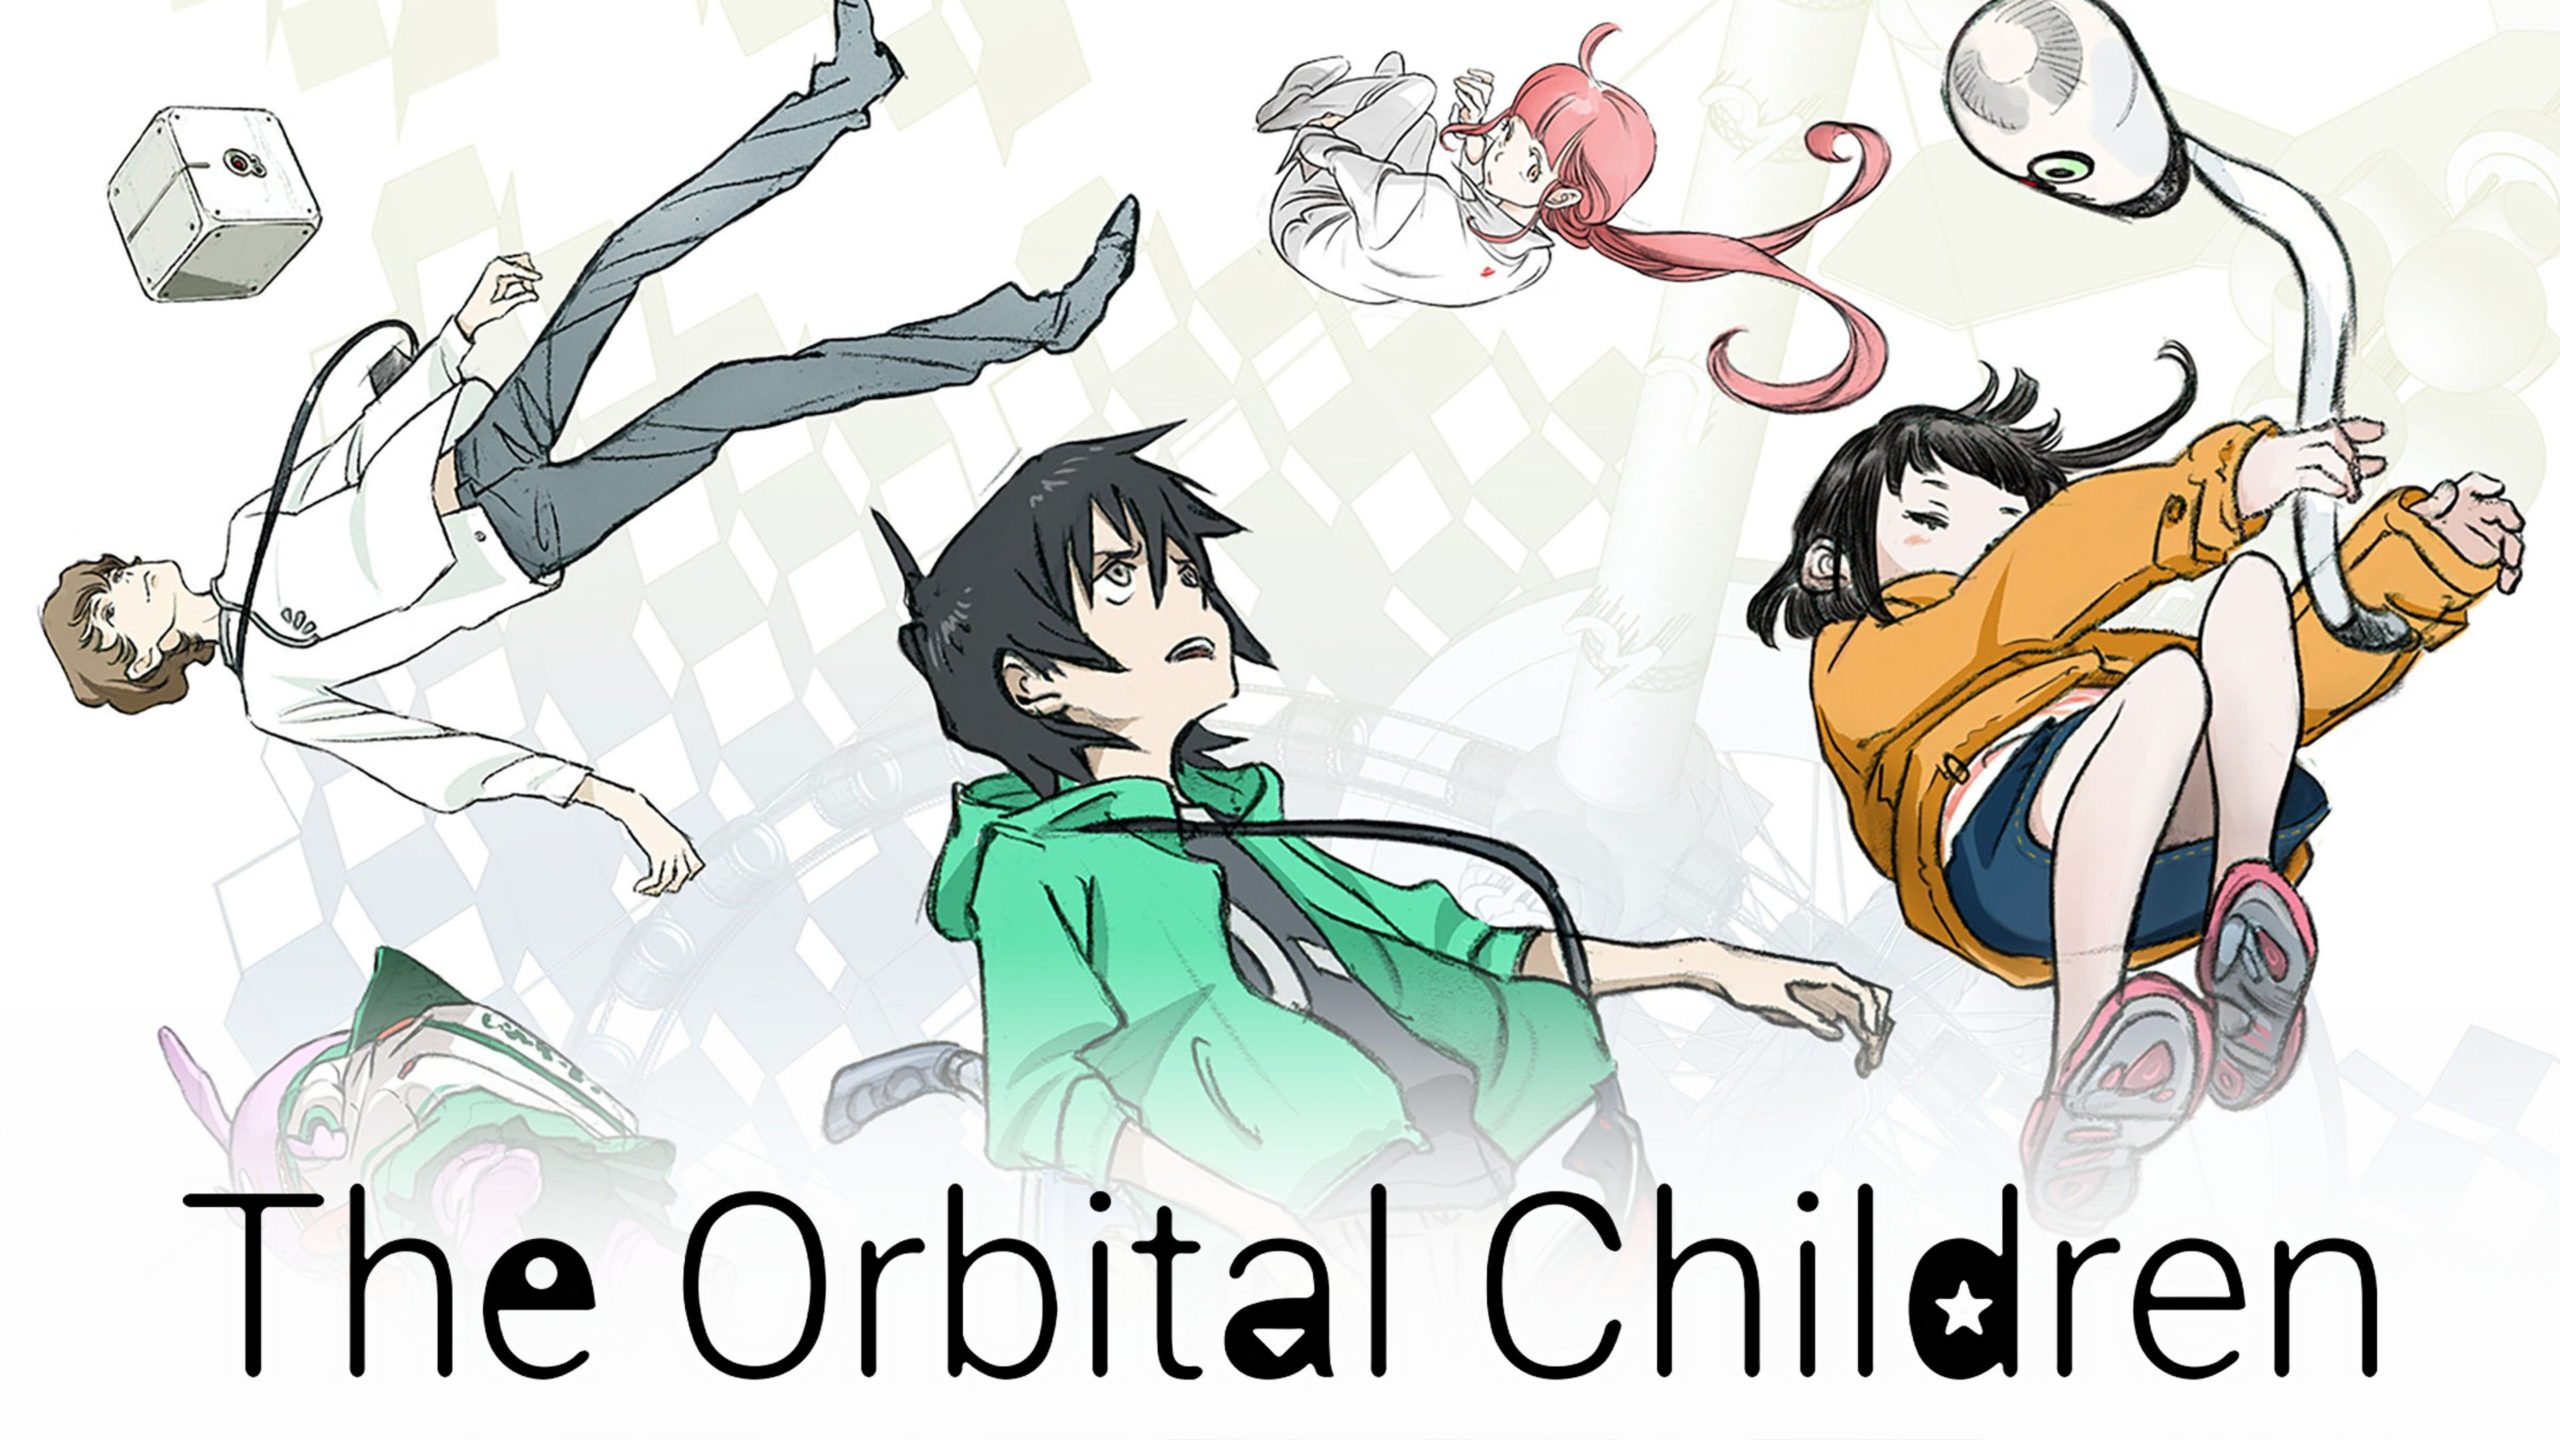 The Orbital Children Episode 5 - Watch the full episode with English subtitles - A Story Ends